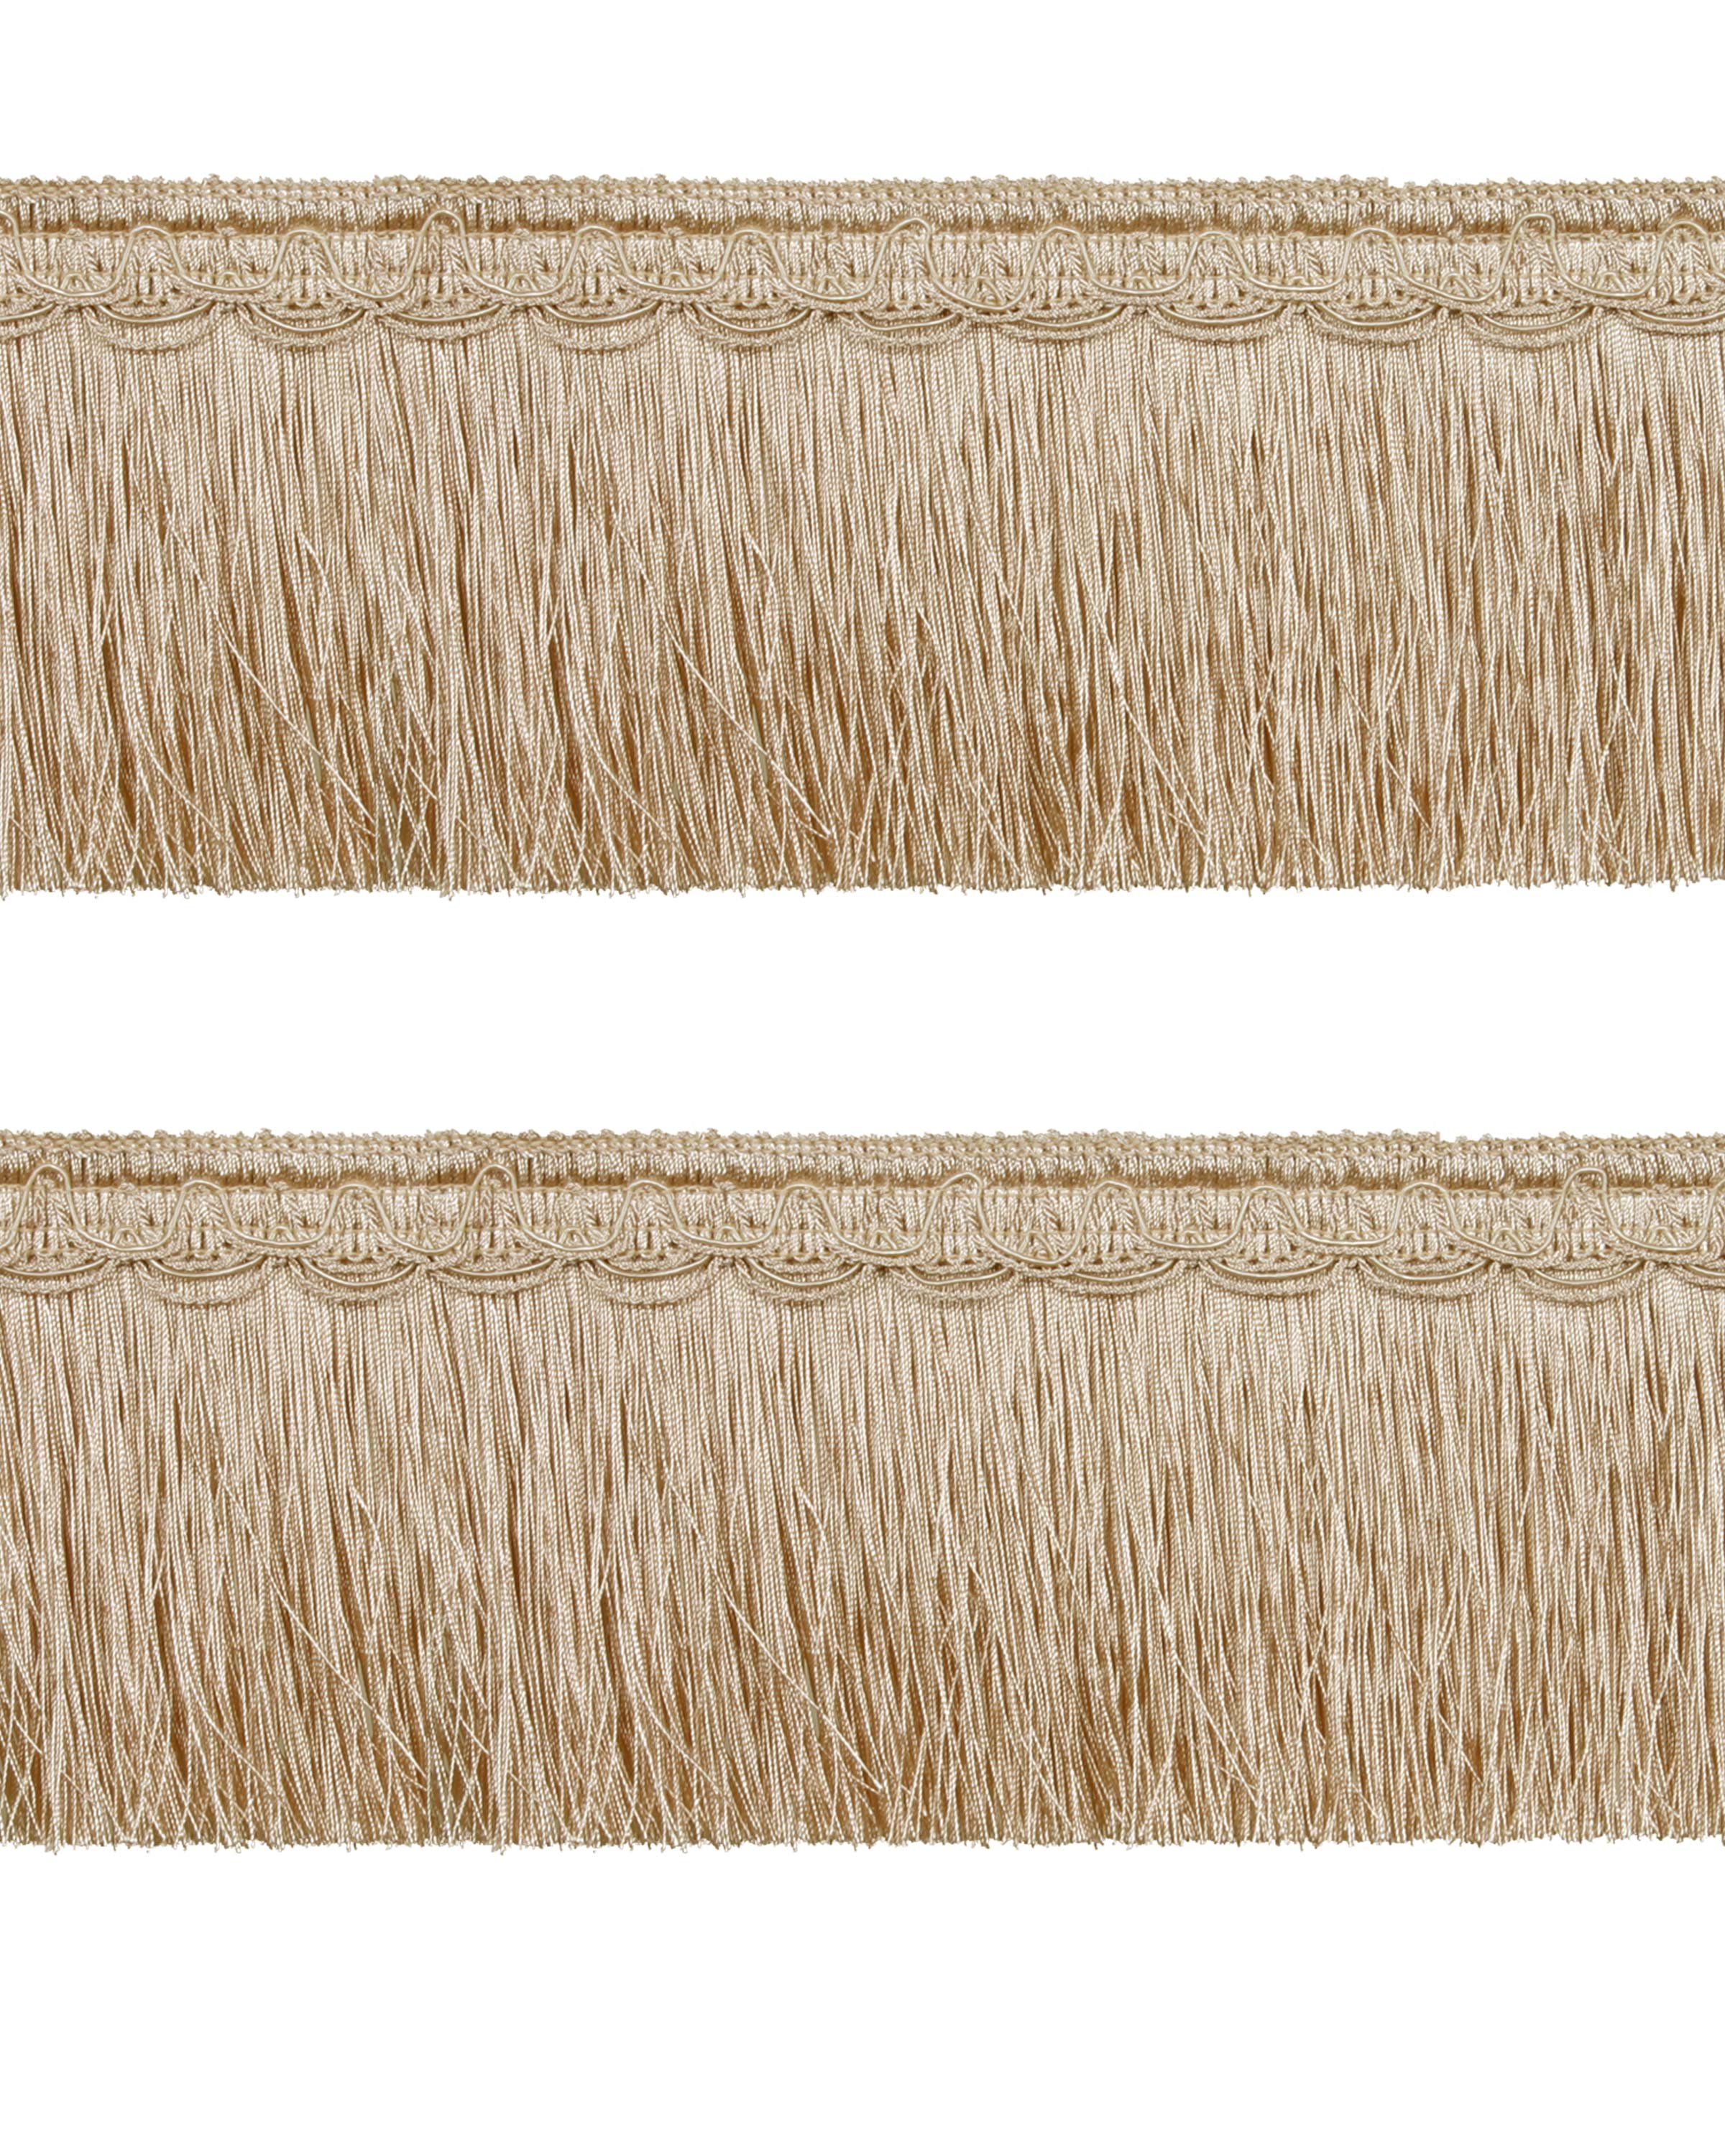 Bullion Fringe on Fancy Braid - Creamy Gold 130mm Price is for 5 metres